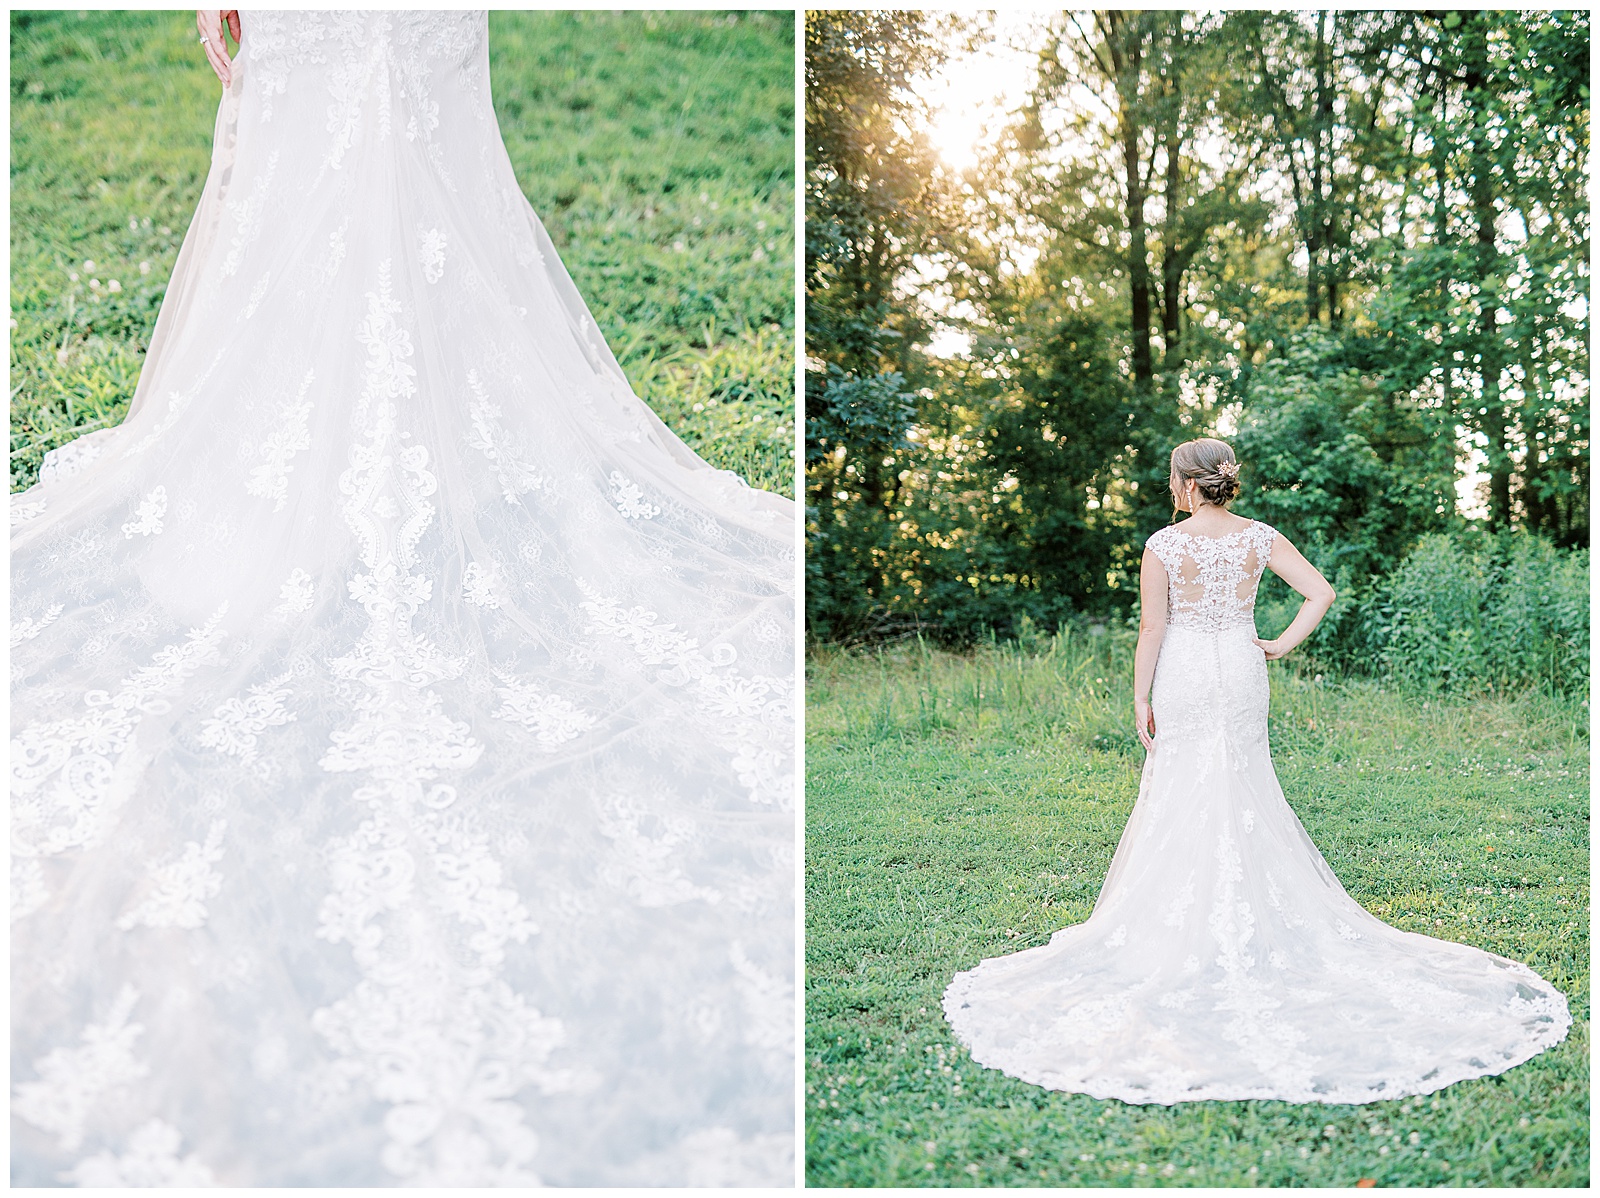 train of long lace wedding dress from sunset bridal portraits in woods and field